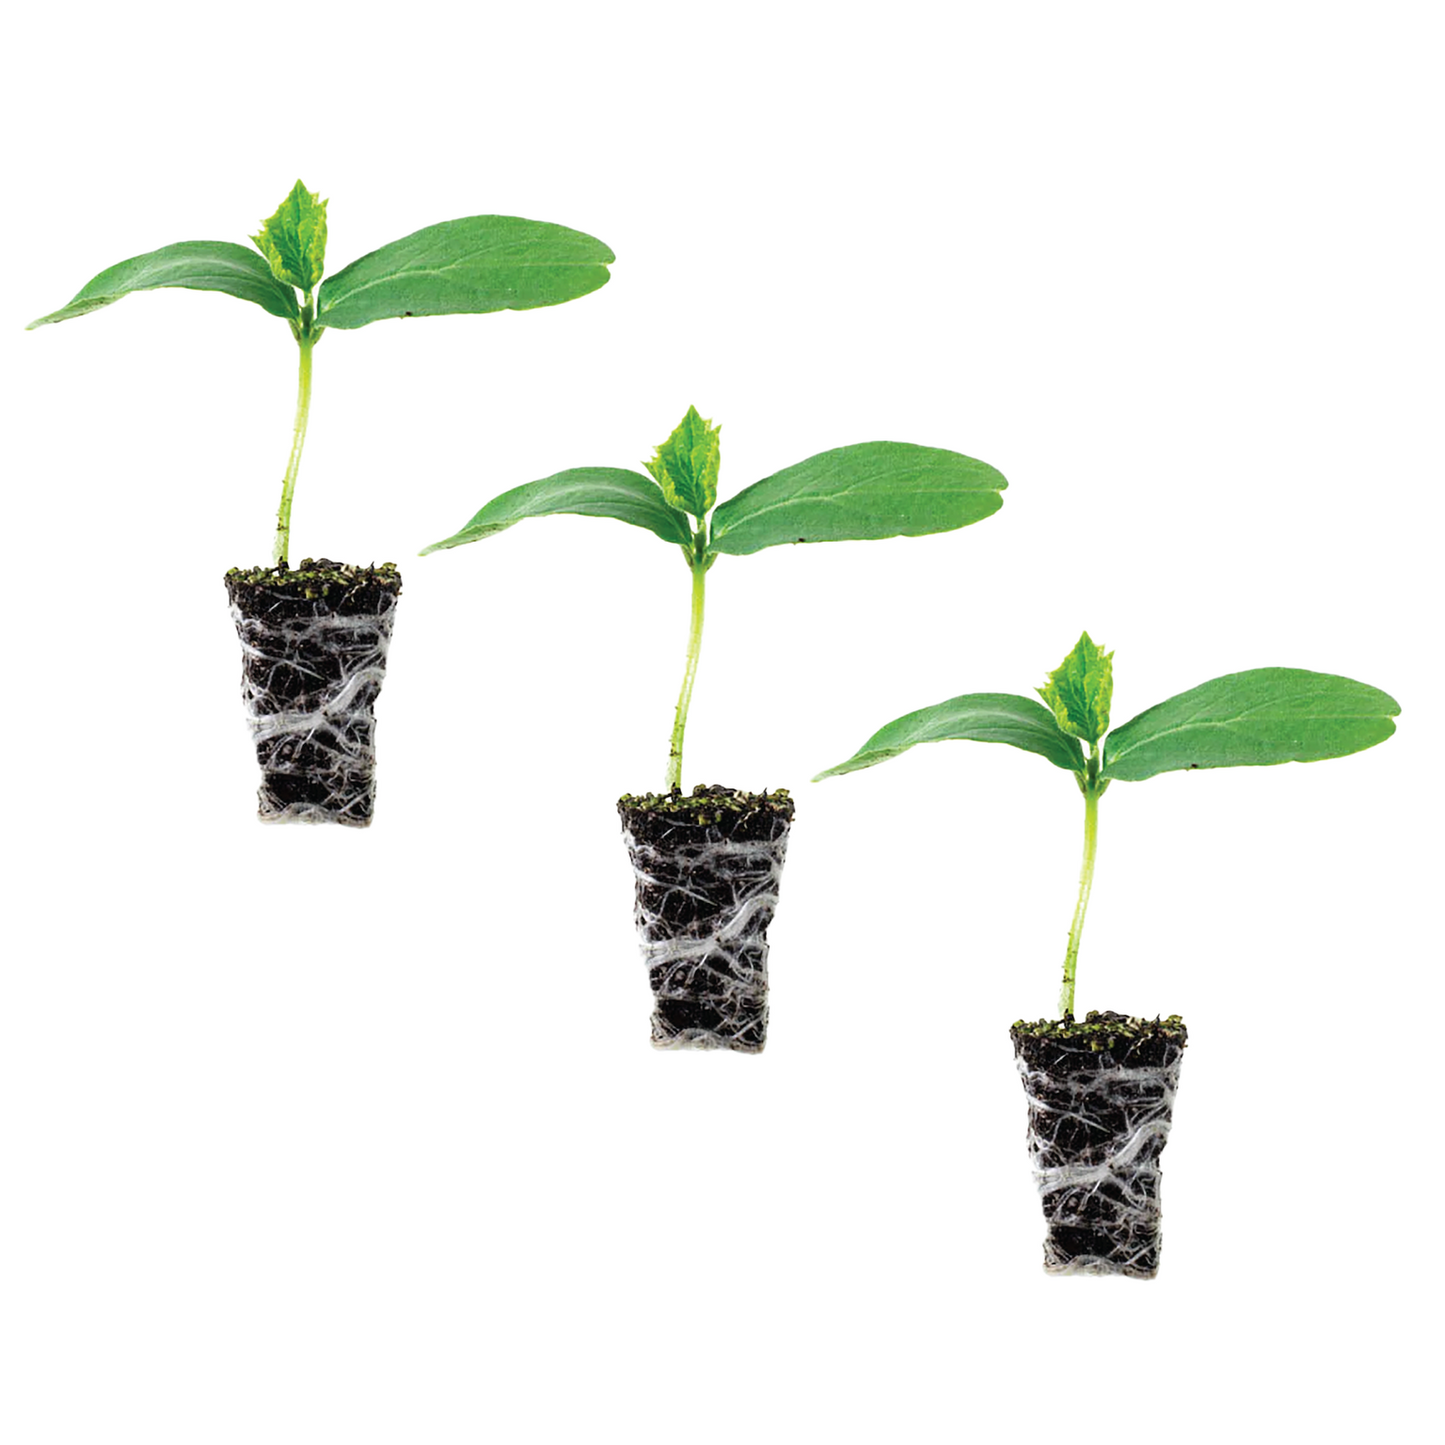 Cucumber Straight Eight Plantlings Live Baby Plants 1-3in., 3-Pack